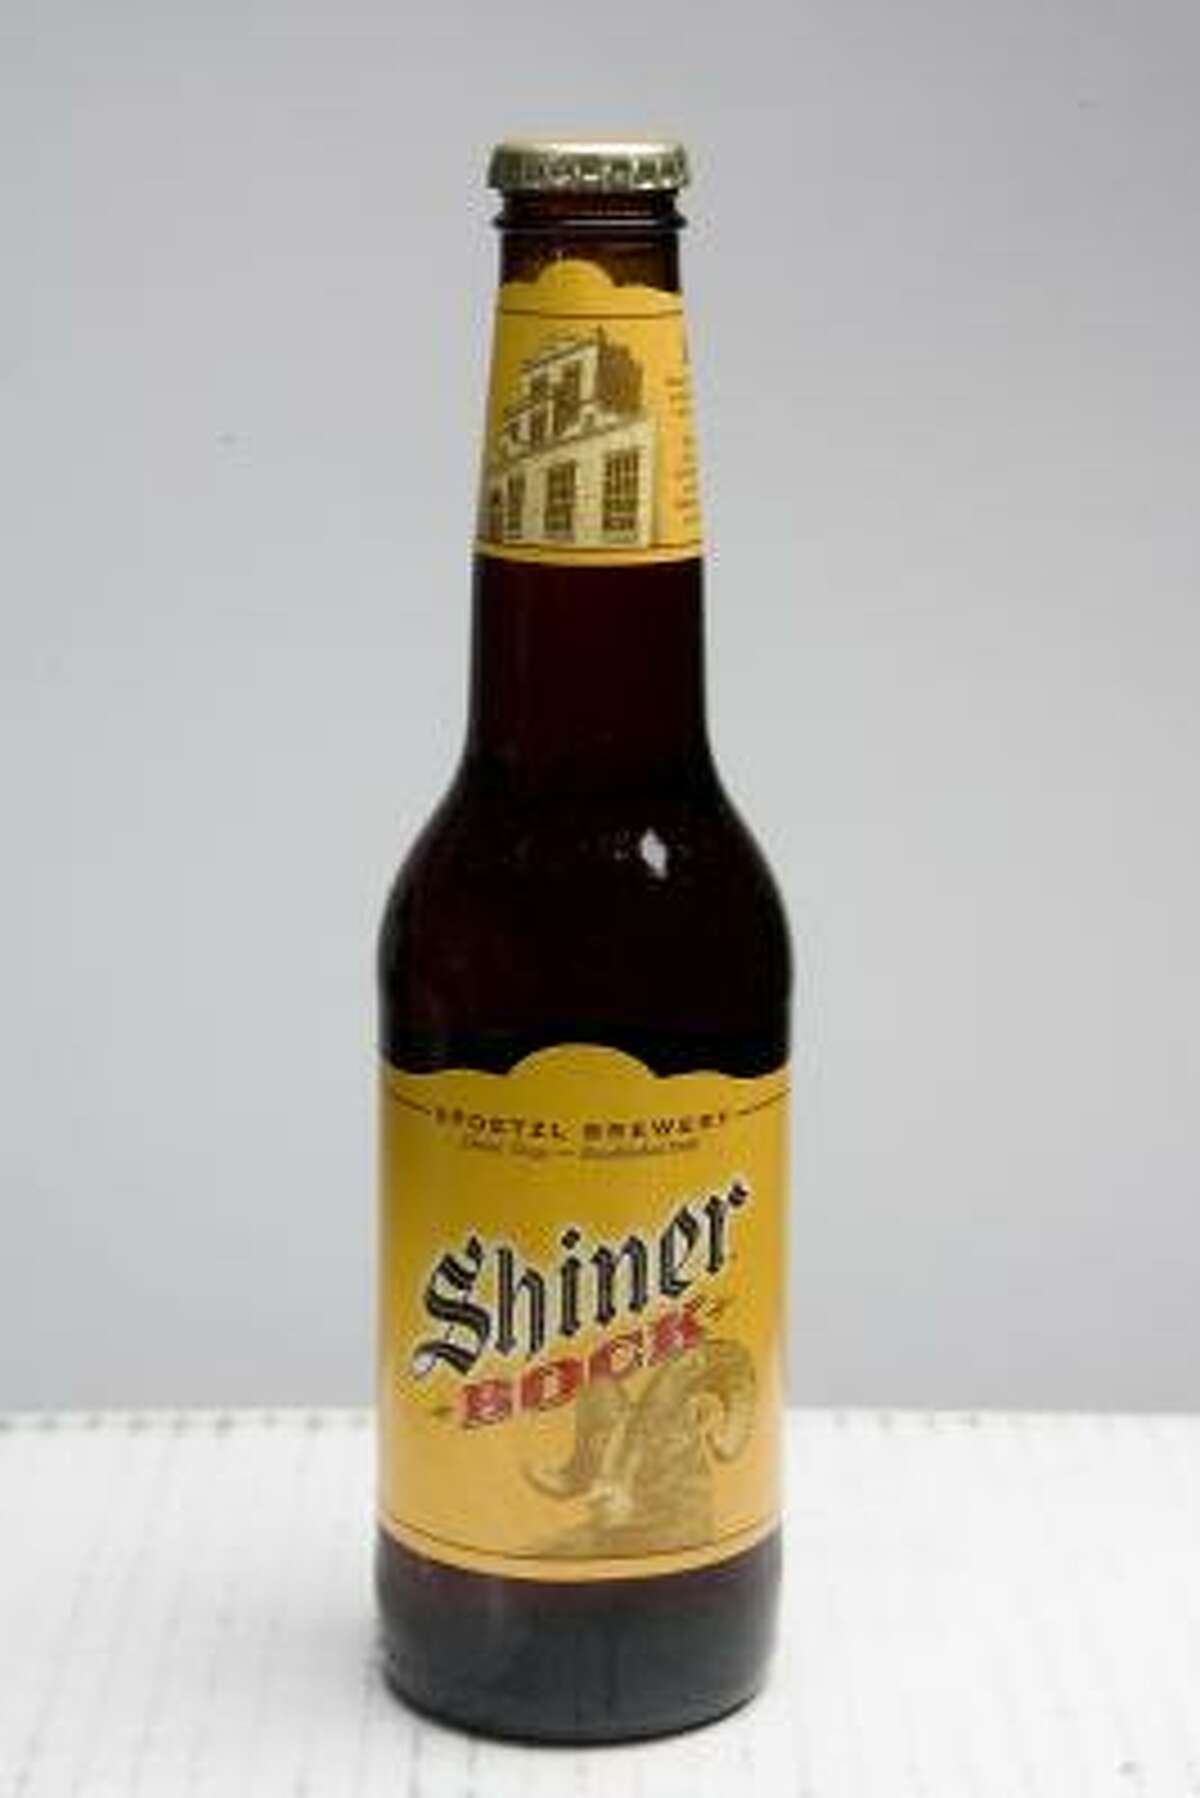 Shiner Bock is a dark, Bavarian-style beer that's a little fruity, chocolaty and hoppy. Try it in meat dishes and compound butters.